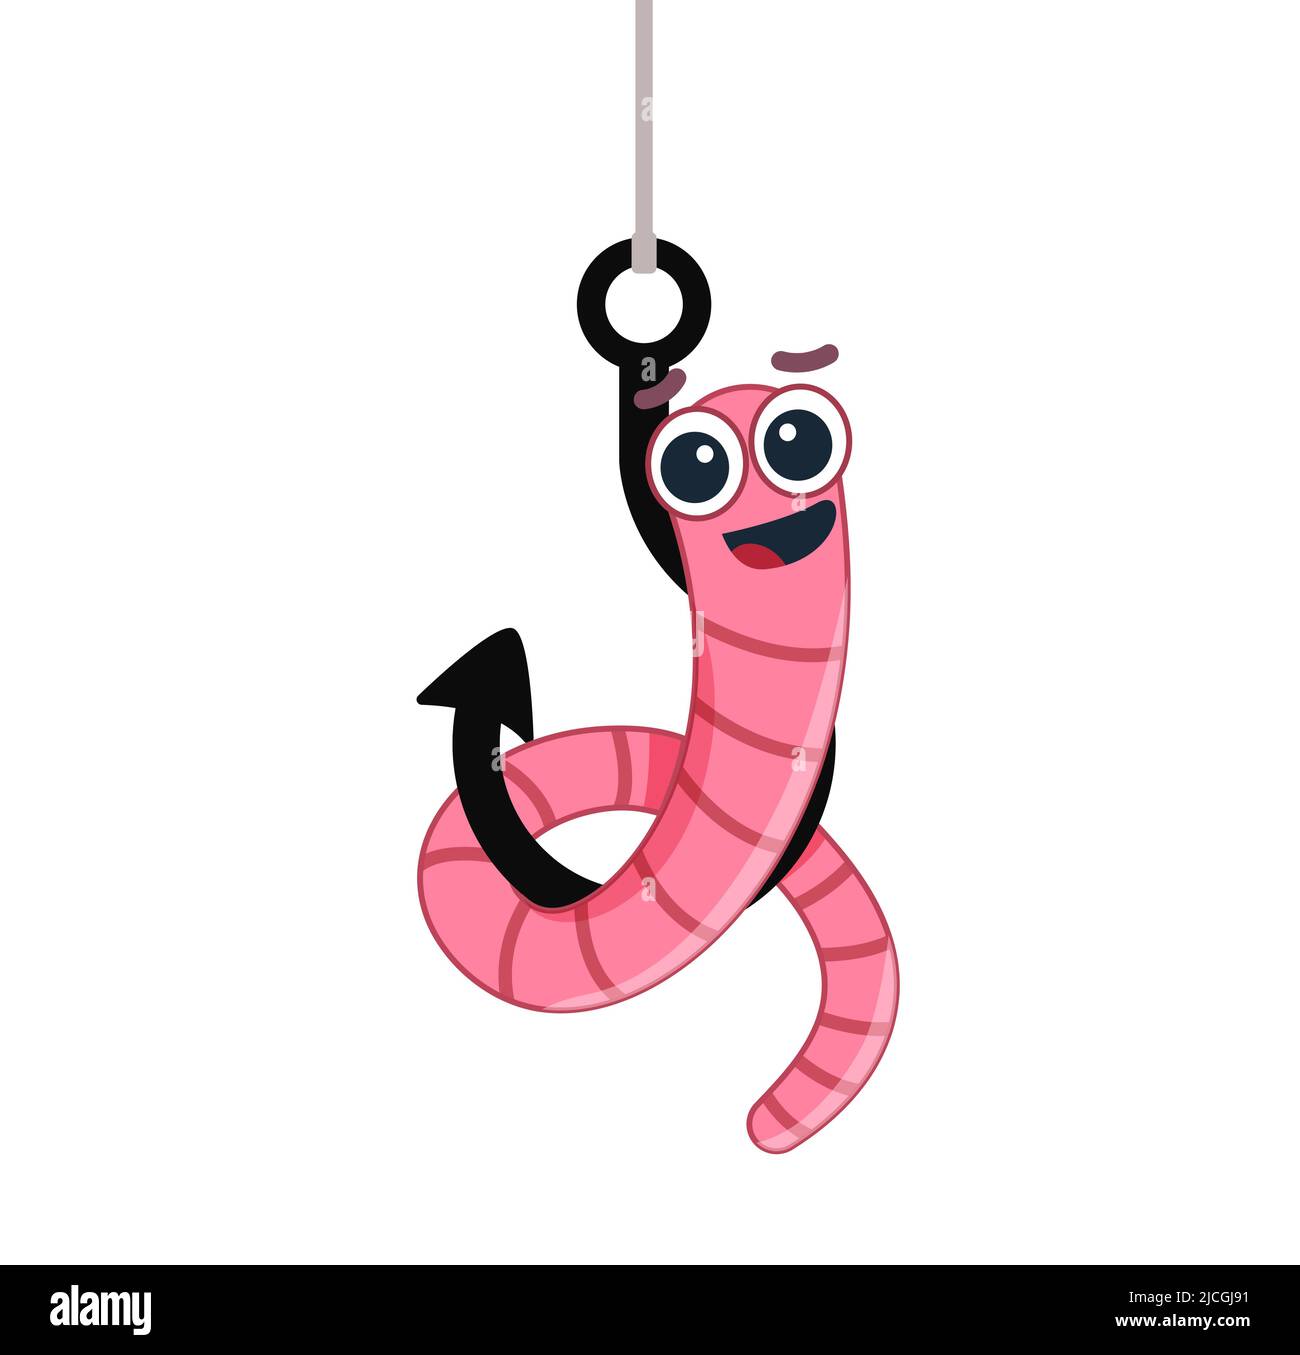 Cartoon worm on a hook. emotion. isolated on a white background. vector illustration. character icon Earthworm. flat style. Crawling animal creature. Stock Vector